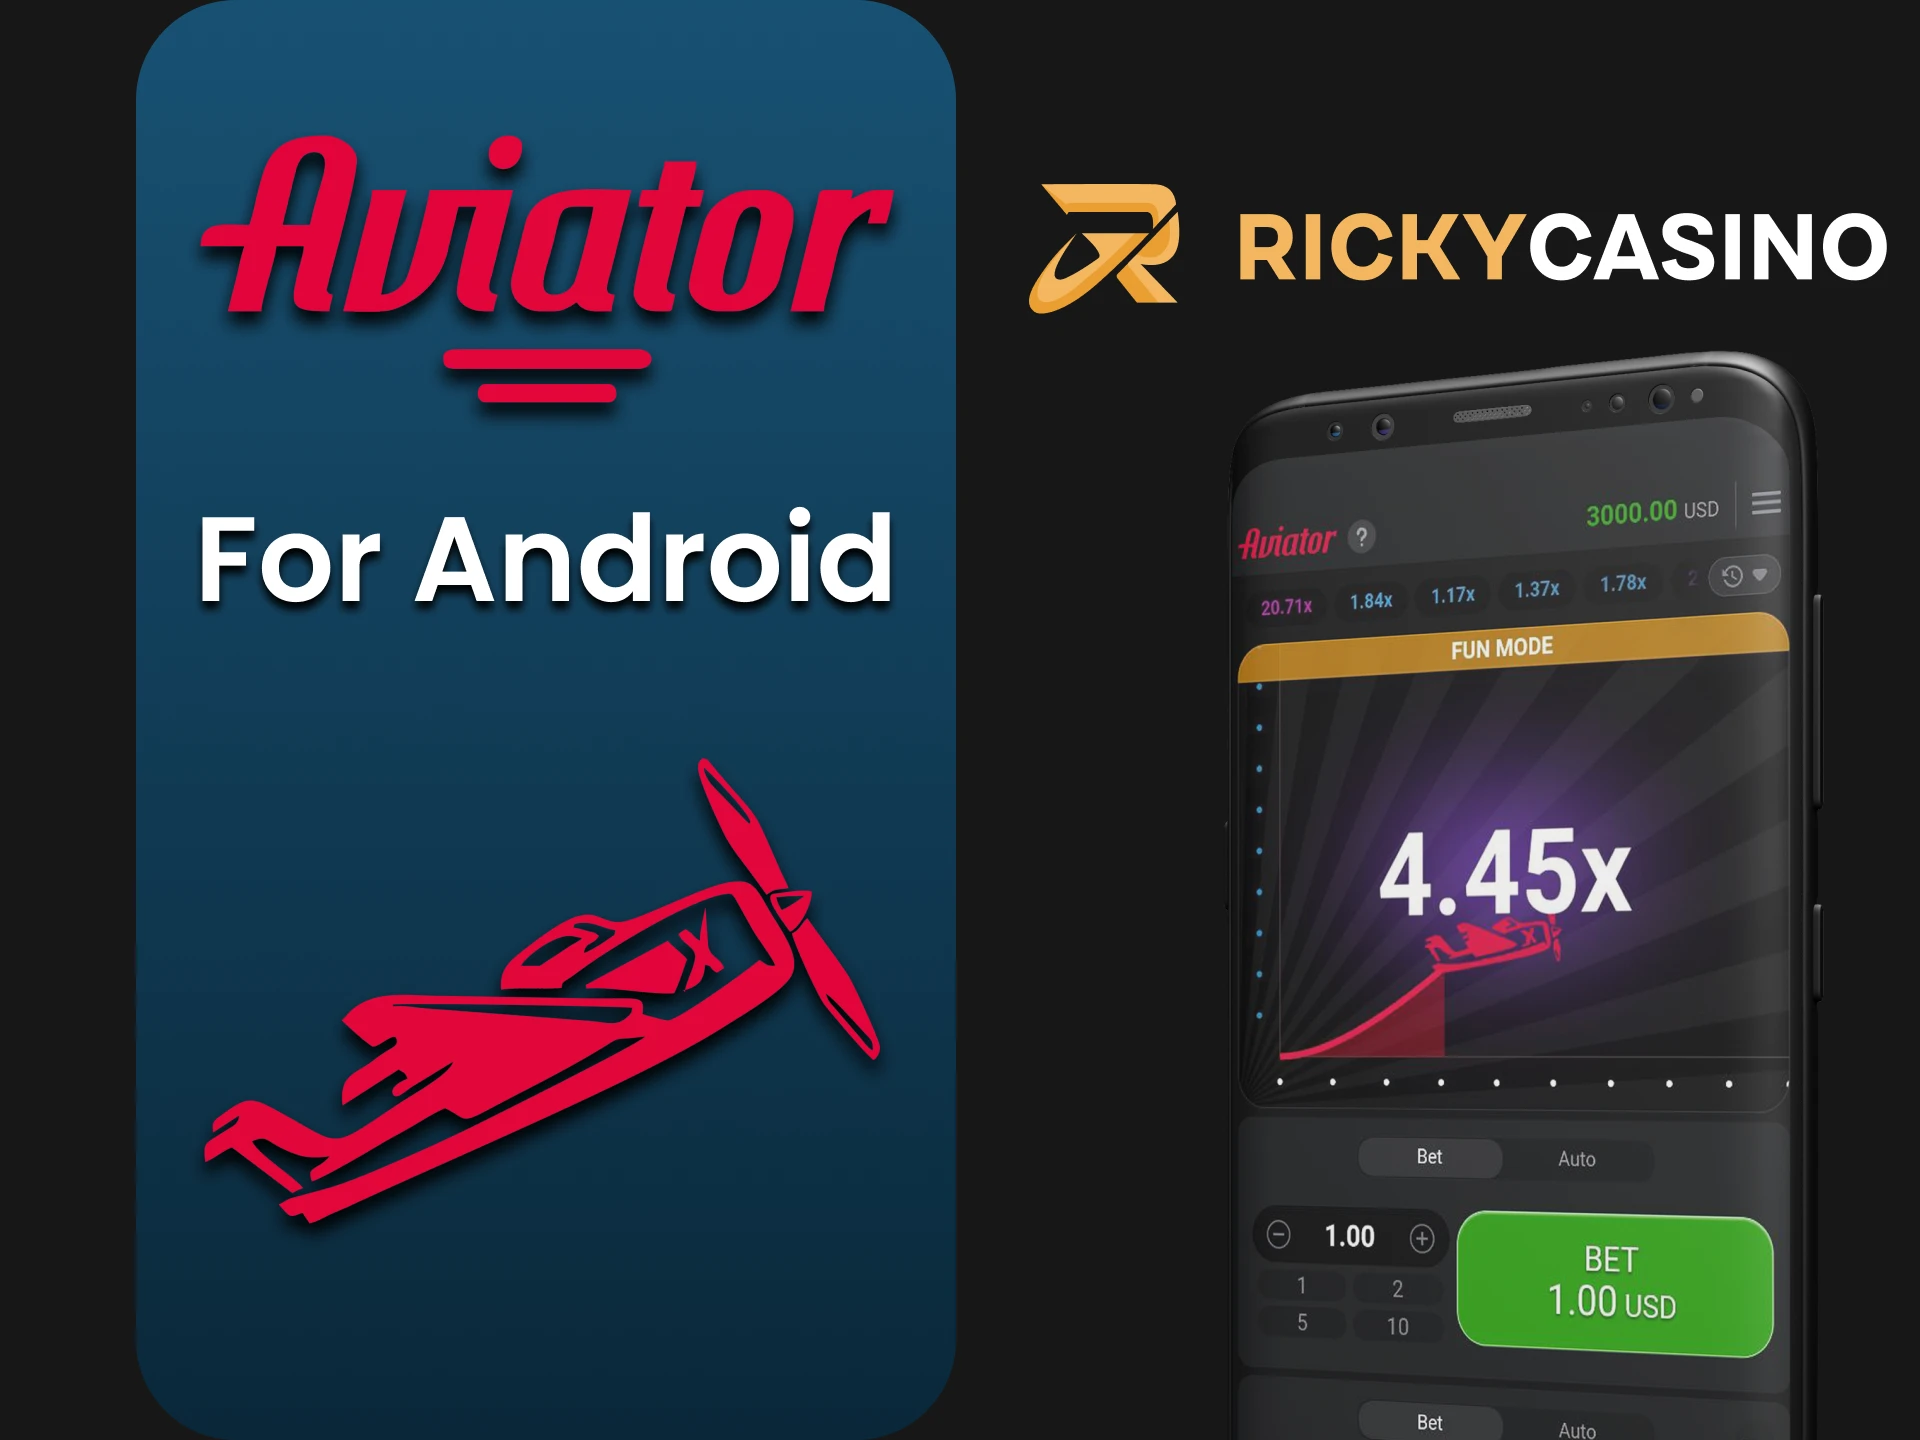 Play Aviator in the Ricky Casino app on Android devices.